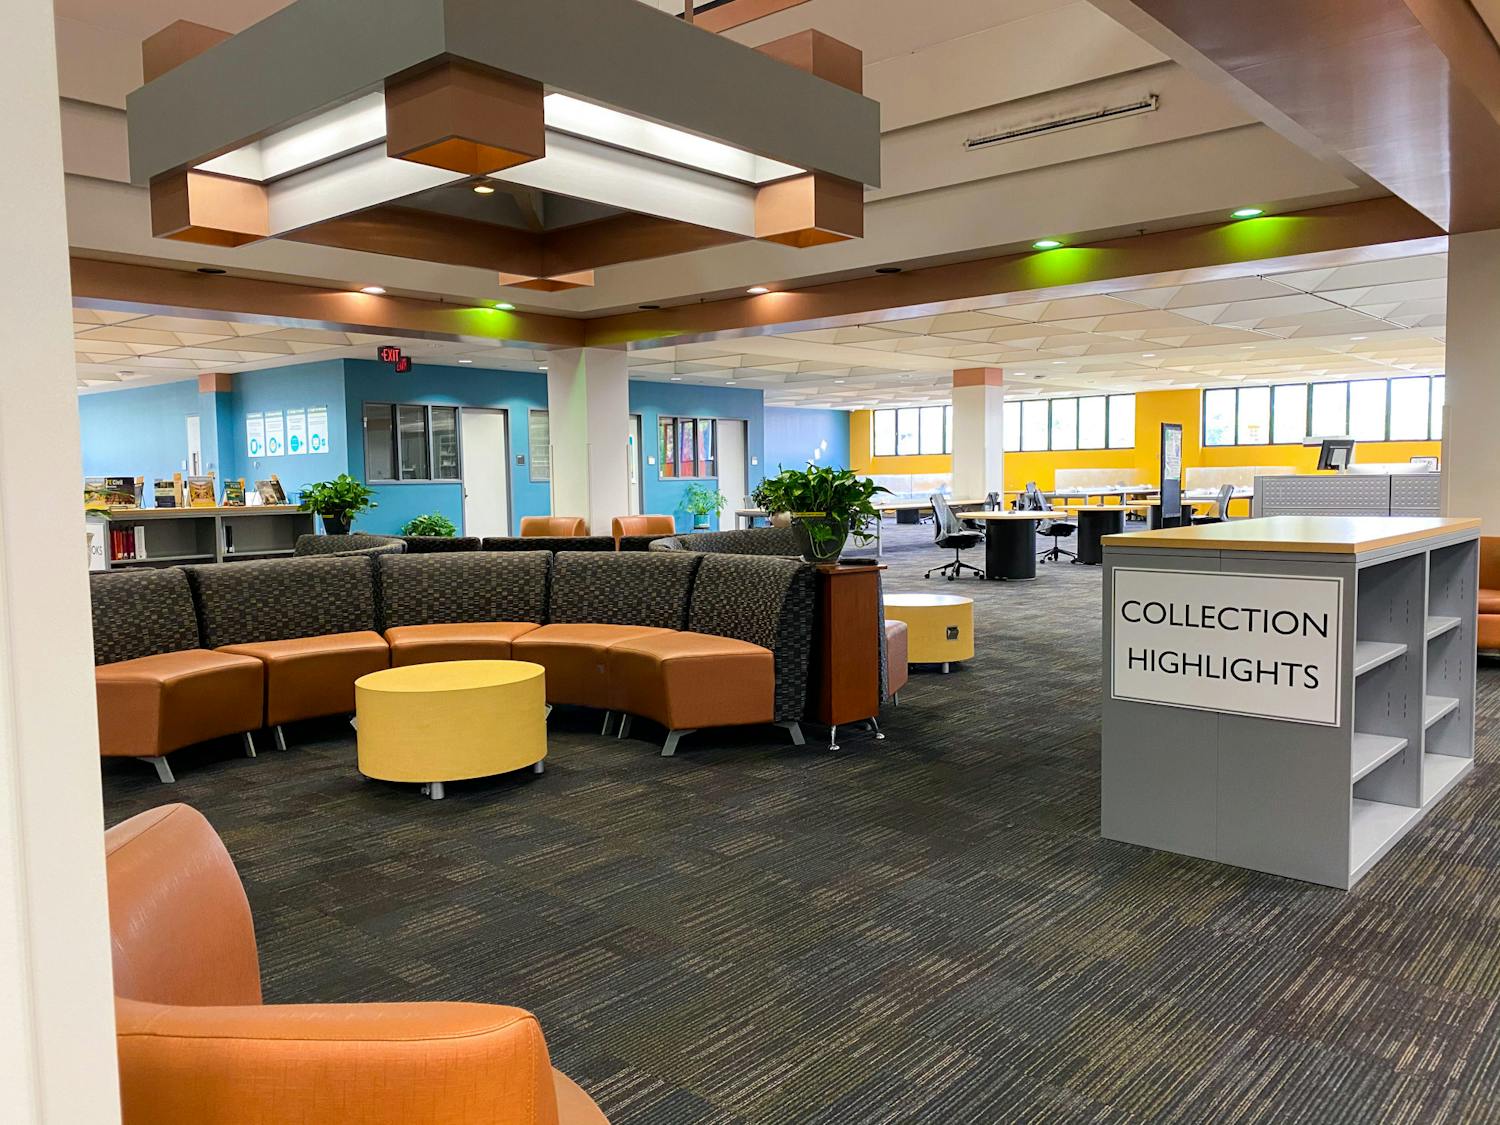 The ground floor of Marston Science Library Monday, June 28, 2021.